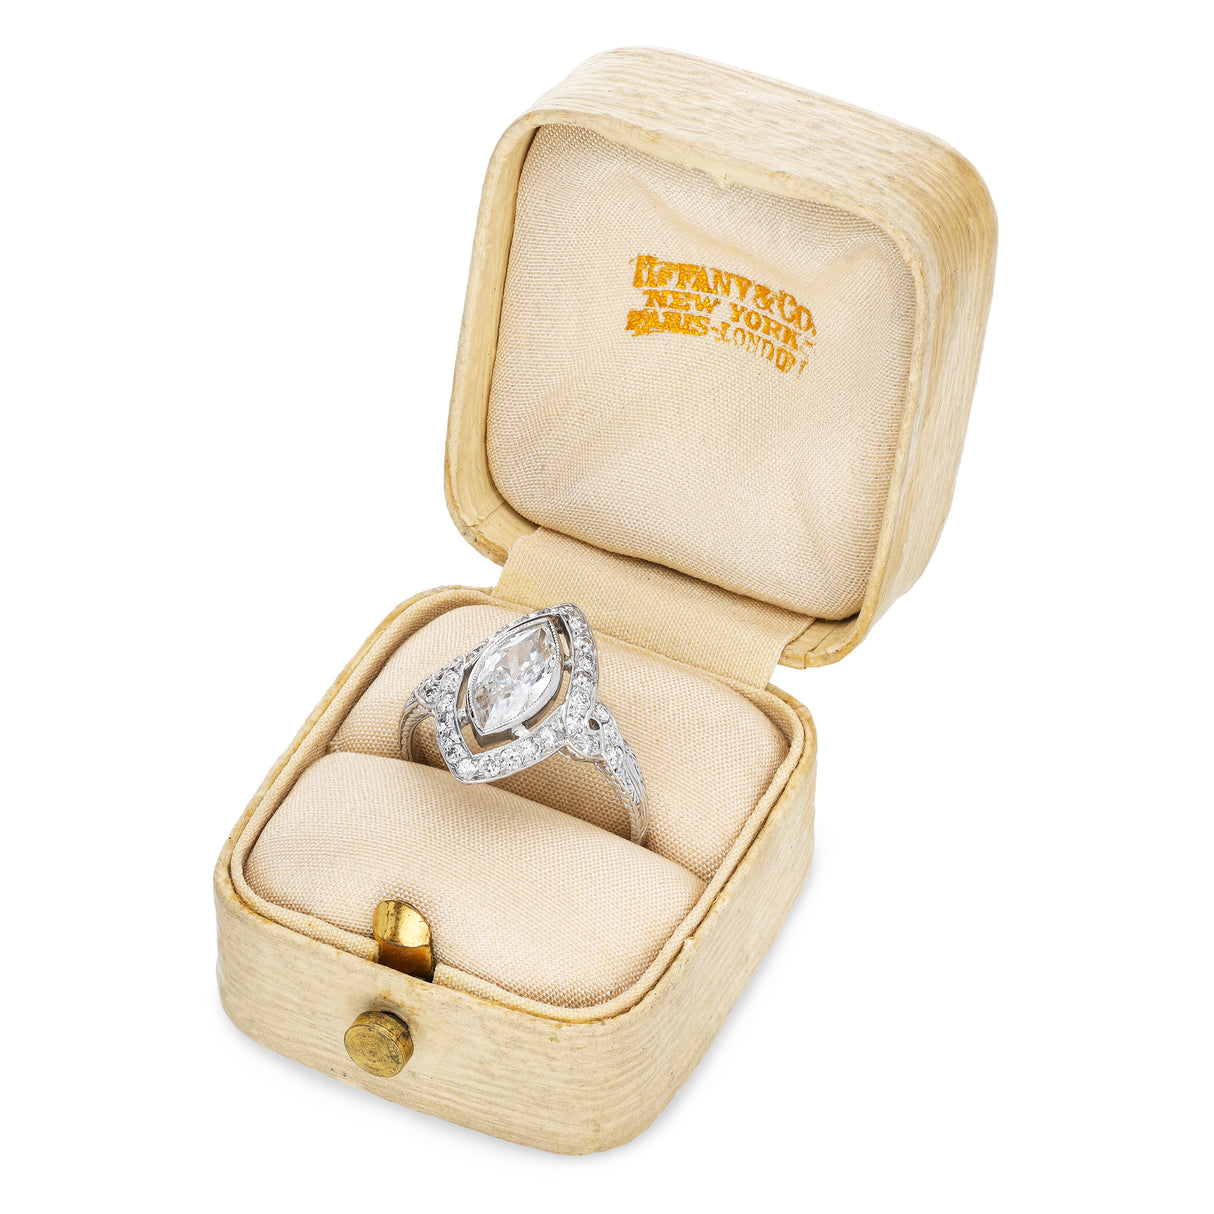 Vintage tiffany engagement ring in antiquated tiffany and co box.